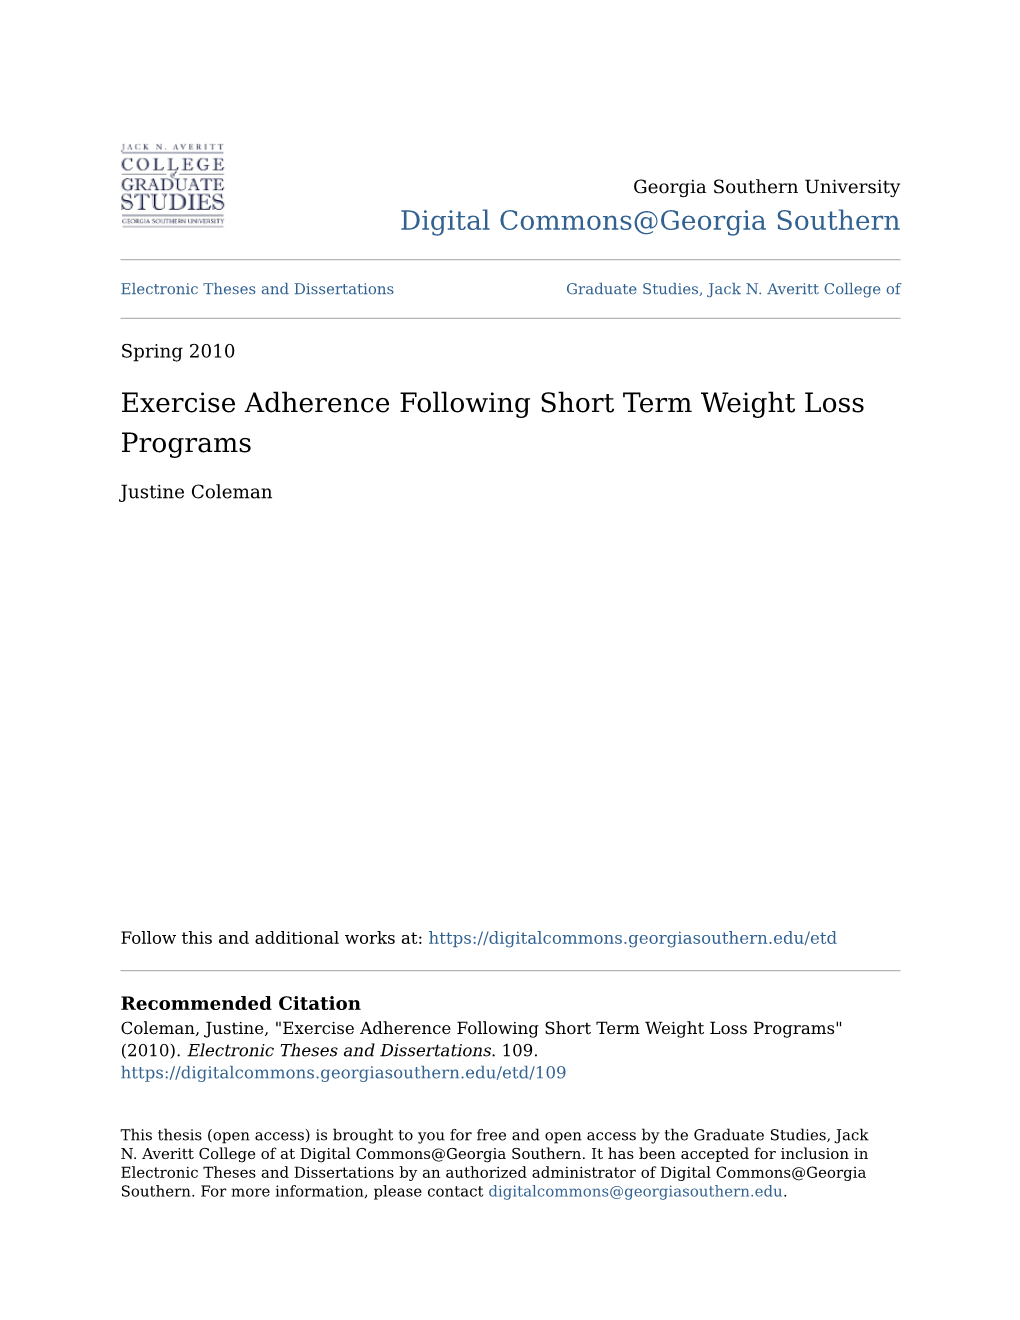 Exercise Adherence Following Short Term Weight Loss Programs